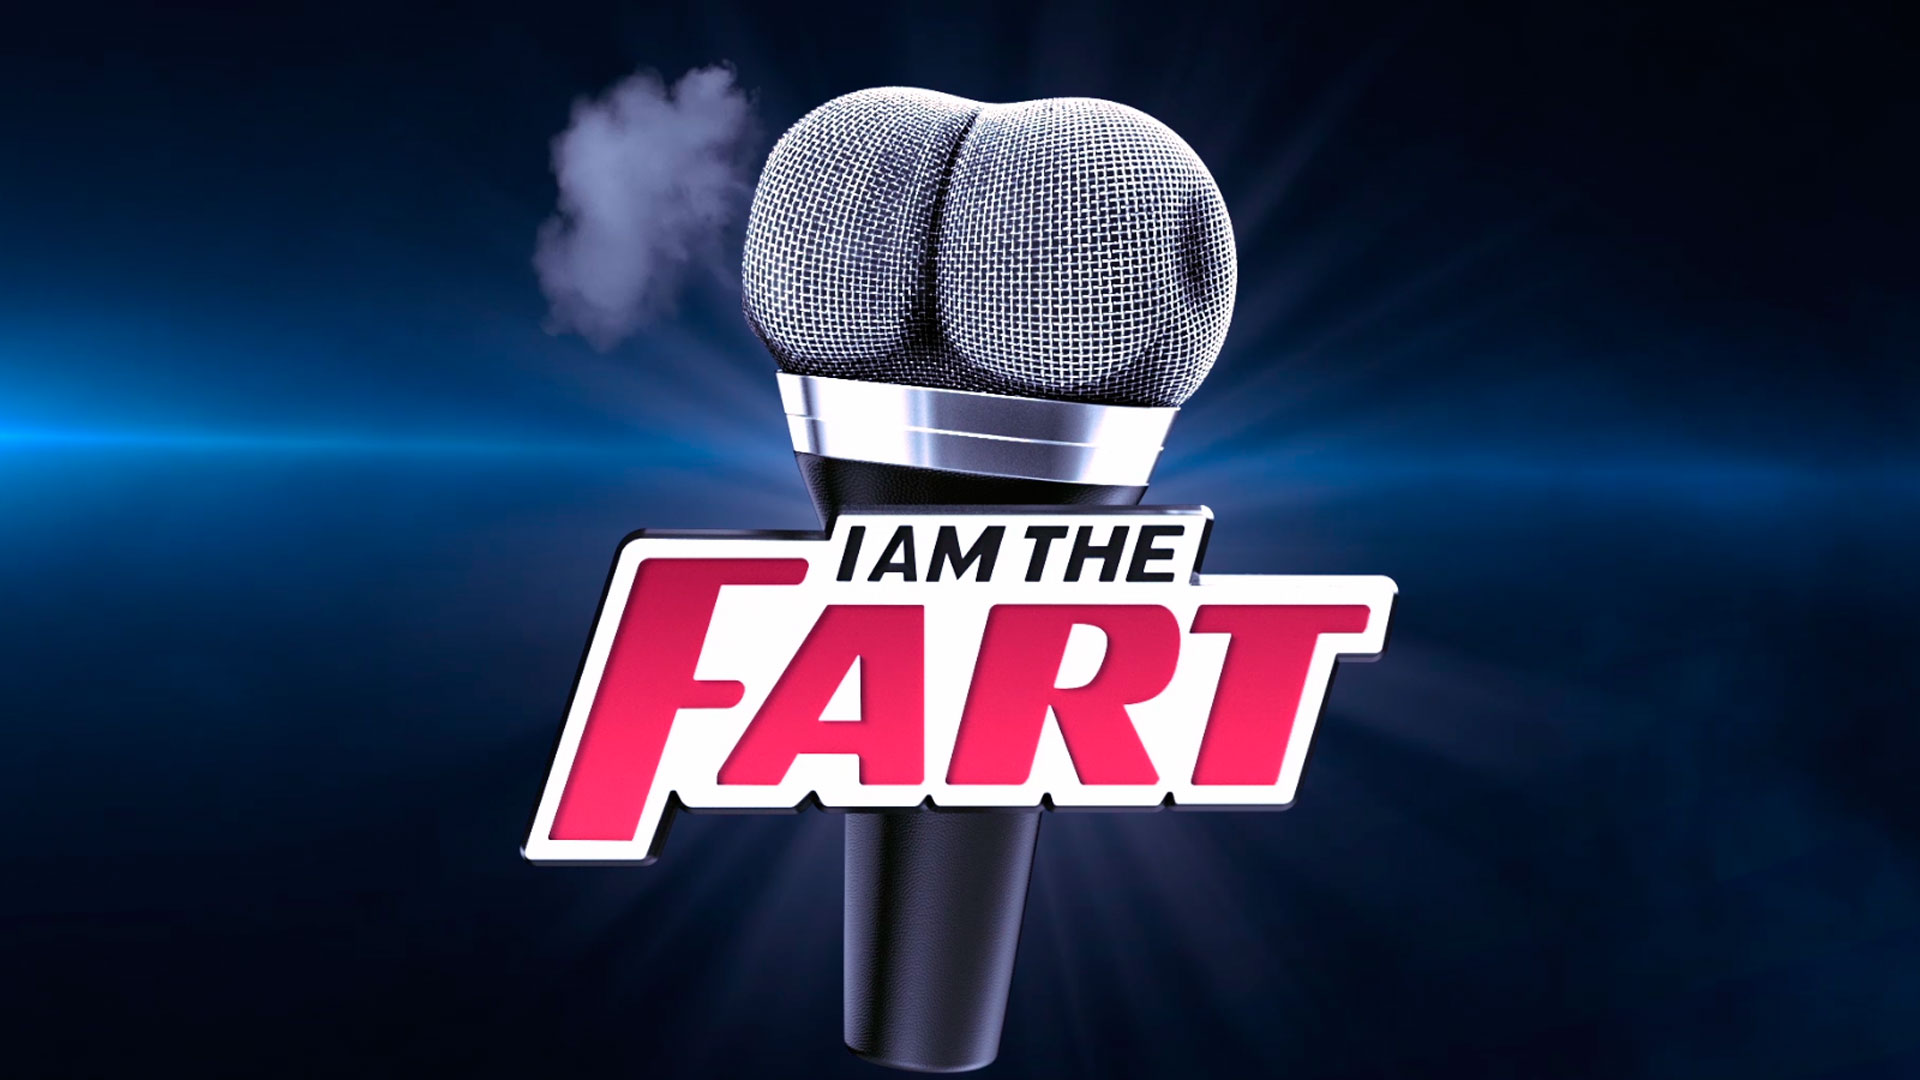 I am the Fart